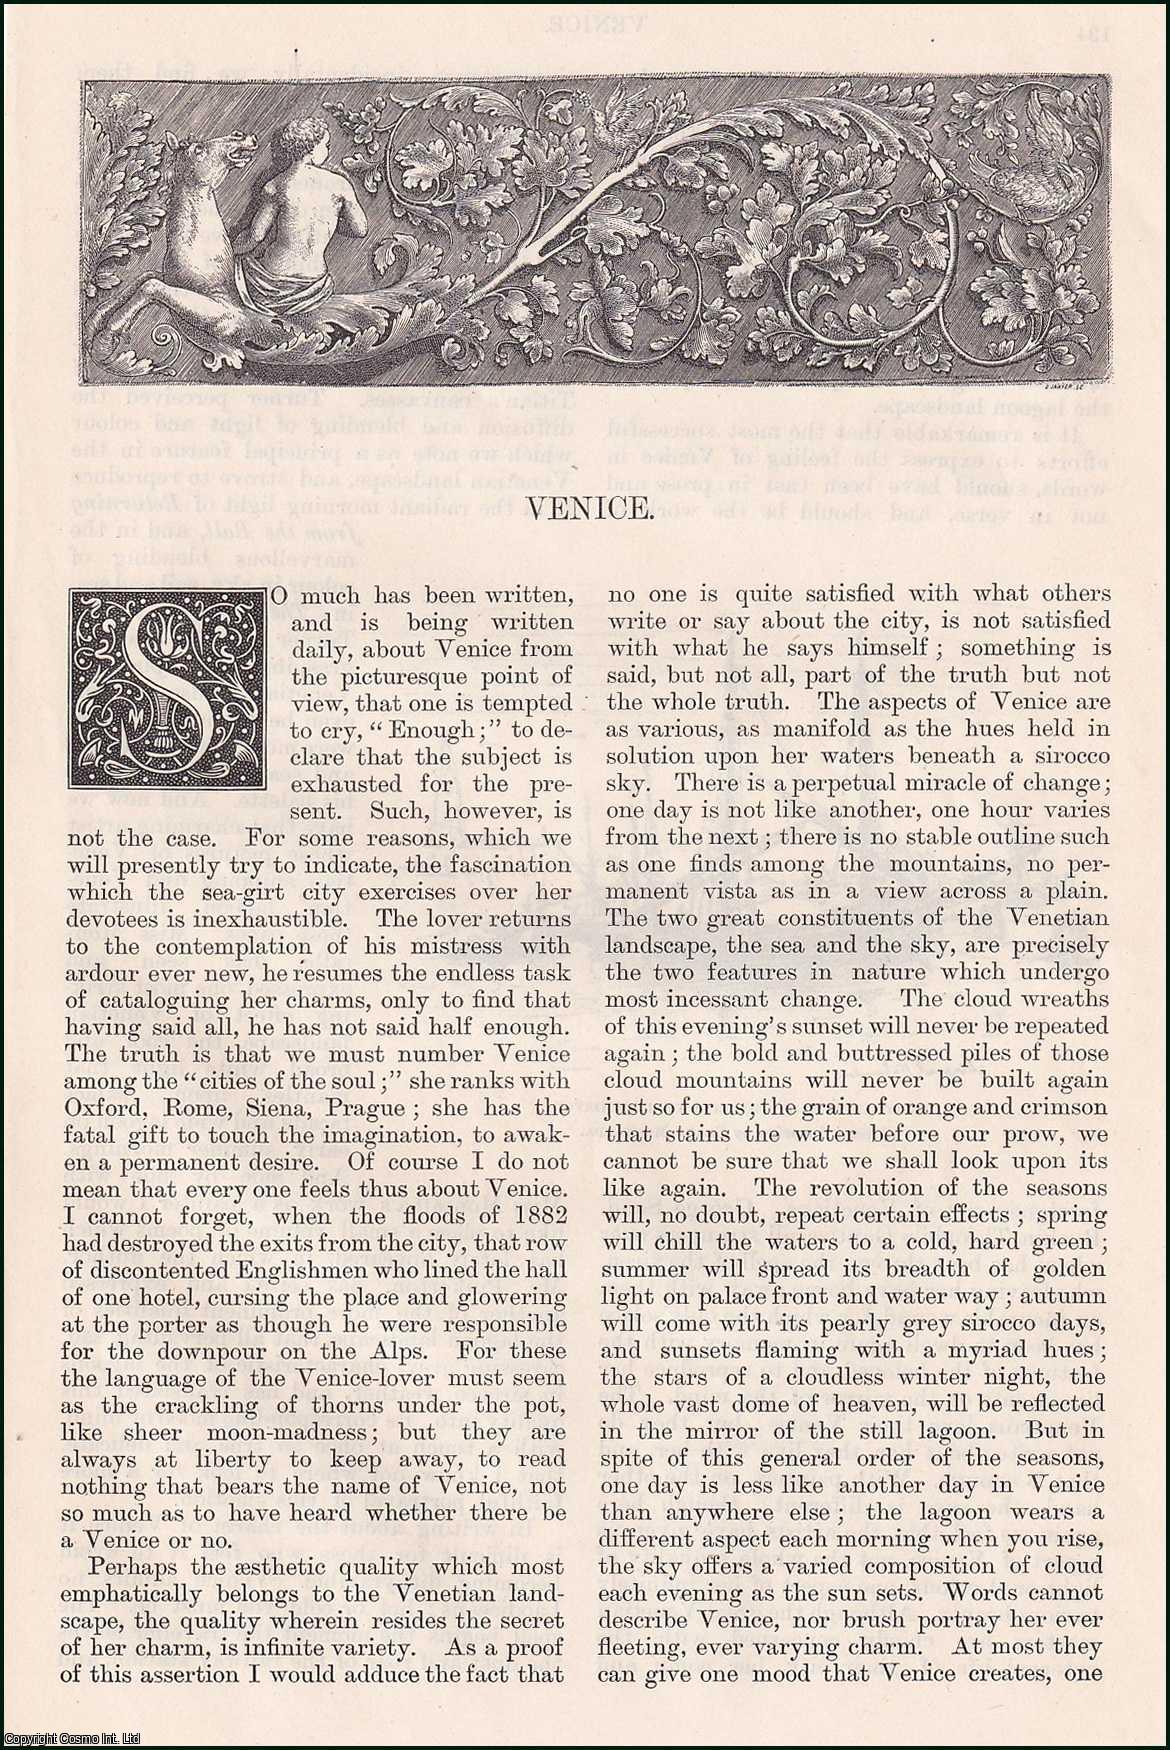 H. F. Brown, illustrations by Clara Montalba - Venice. An original article from the English Illustrated Magazine, 1887.